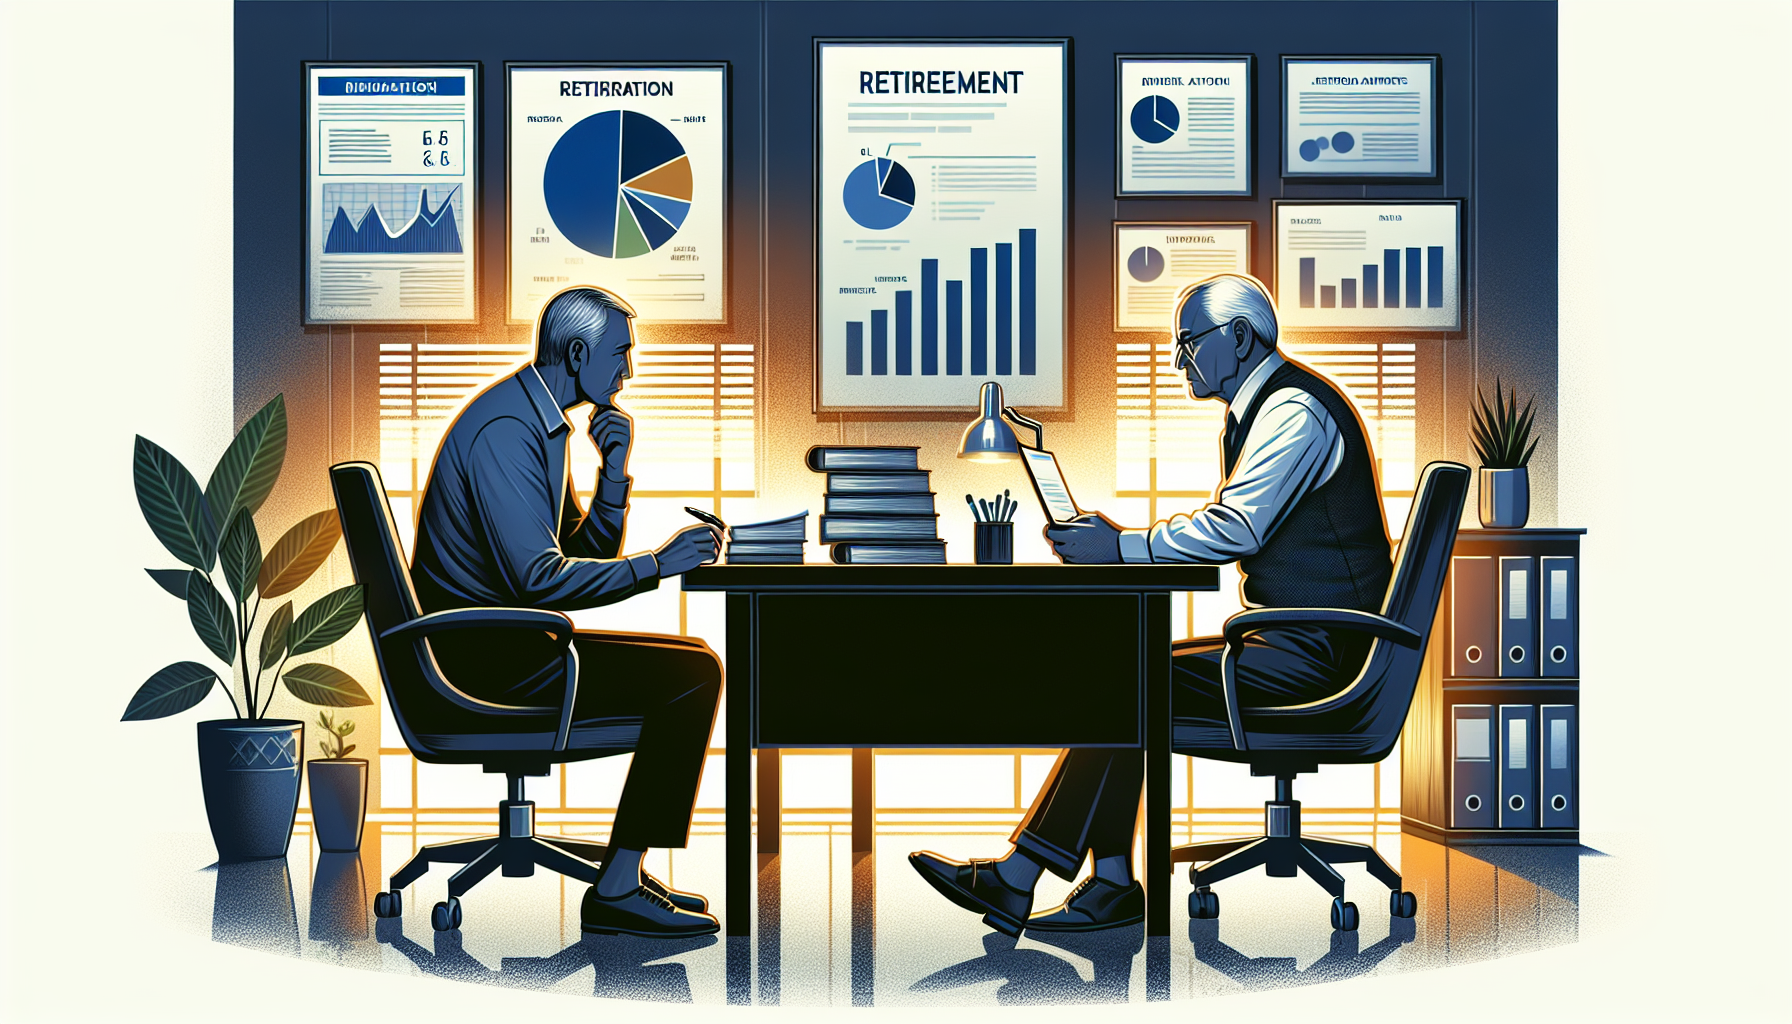 Illustration of a person consulting with a financial advisor regarding retirement interests during divorce